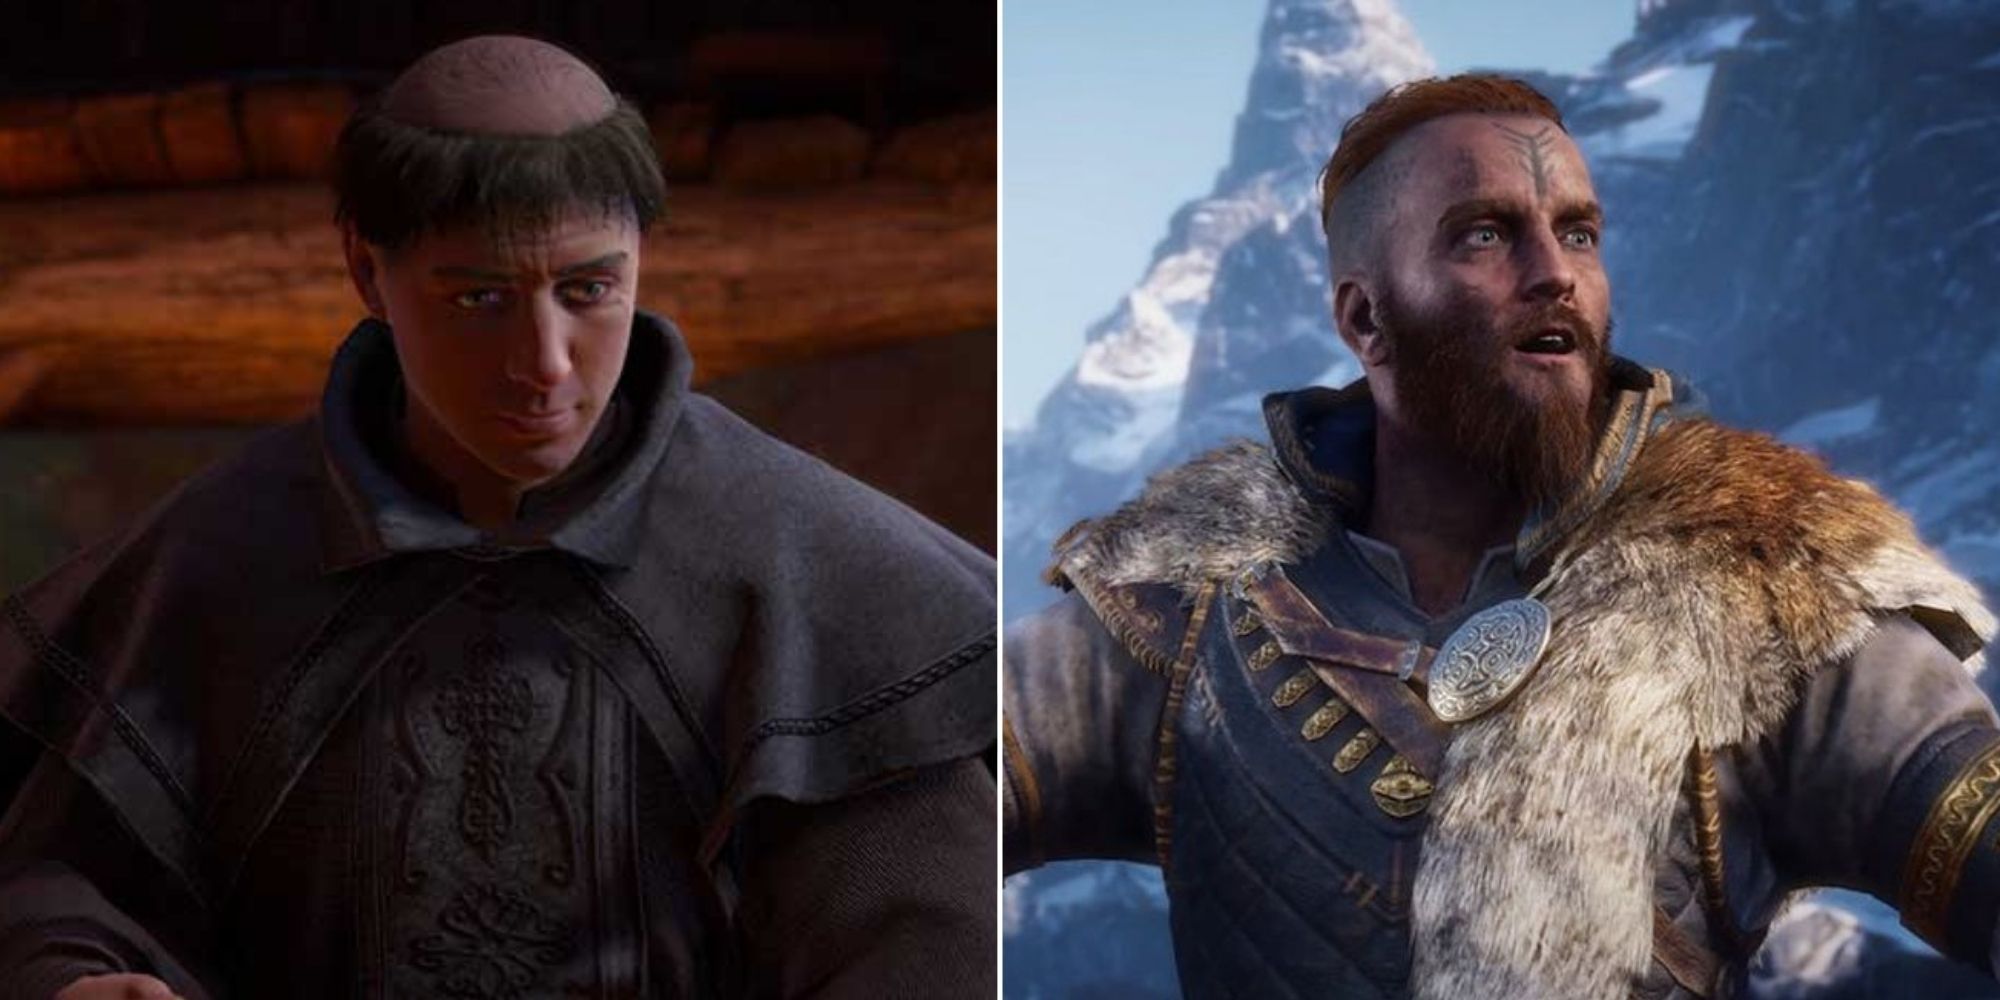 On the left is a picture of a monk and on the right is a picture of Sigurd in Assassin's Creed Valhalla